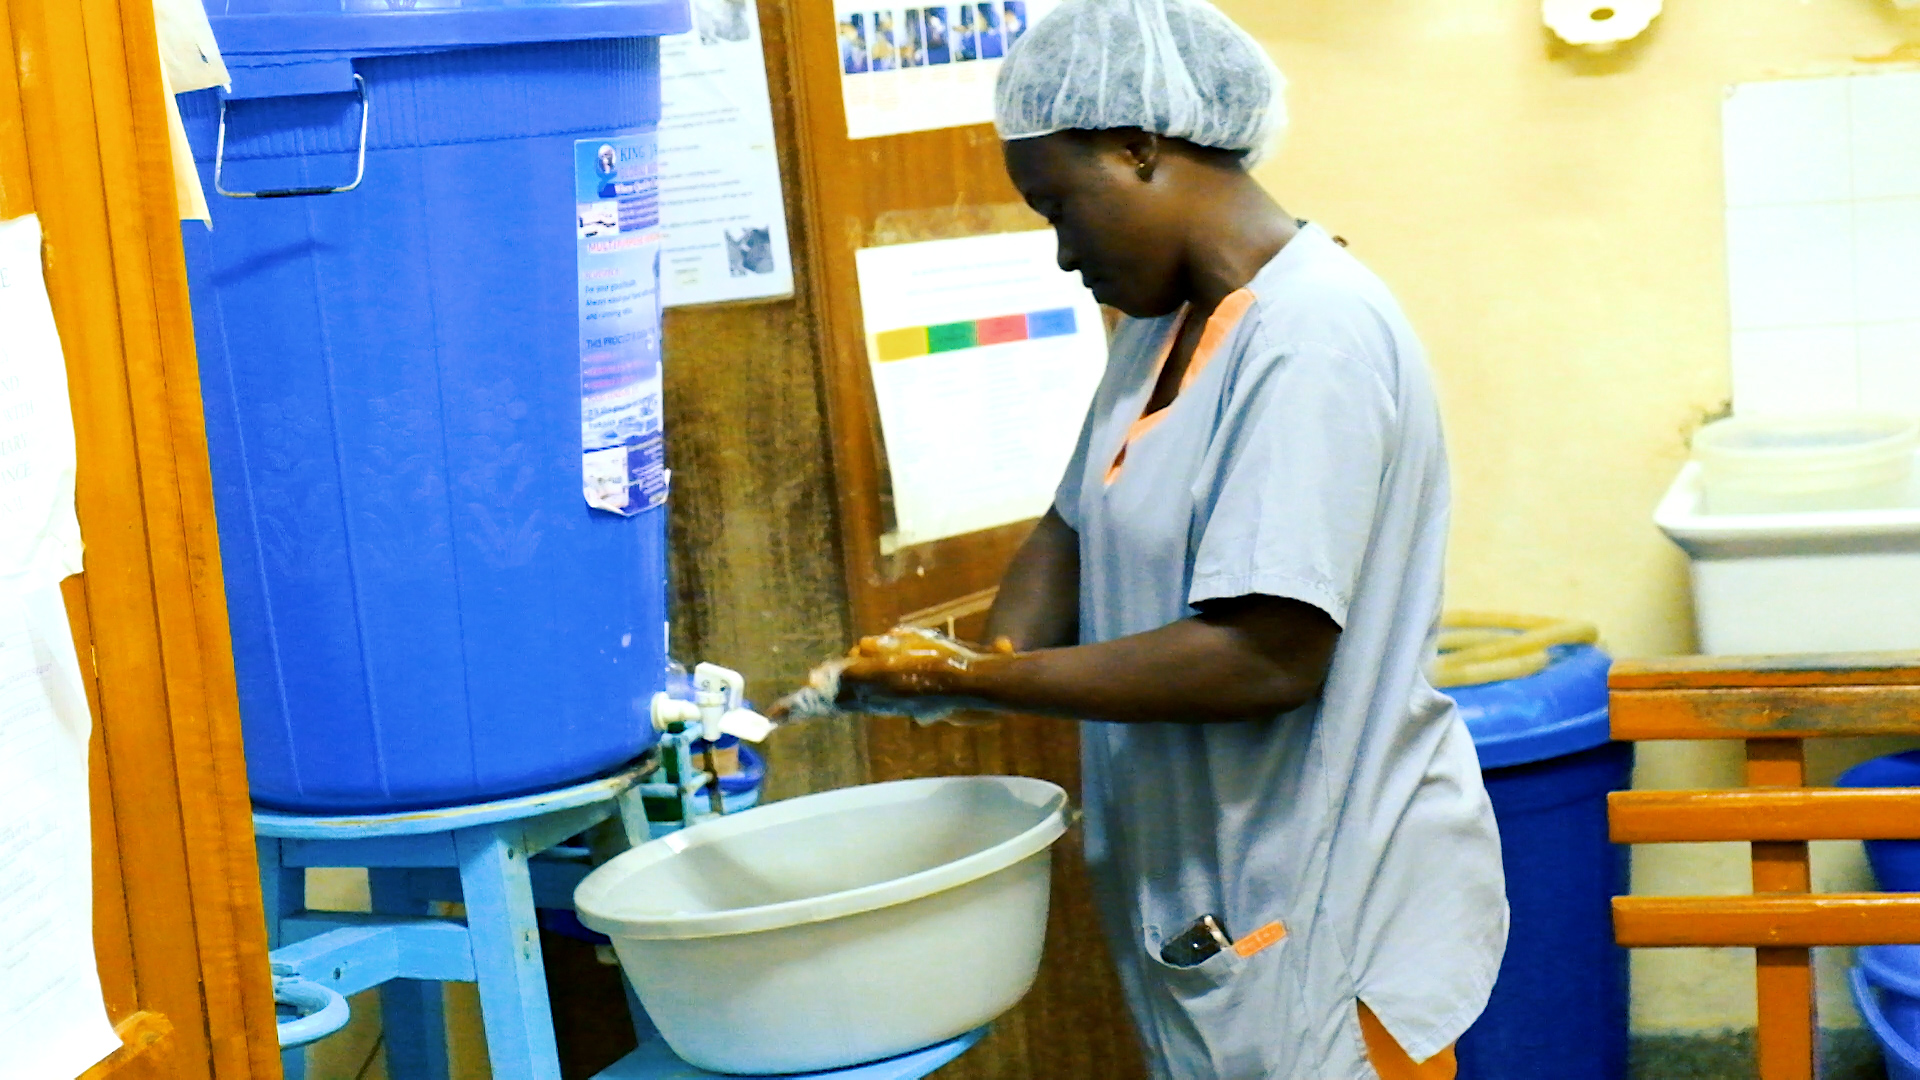 A healthcare worker washing her hands